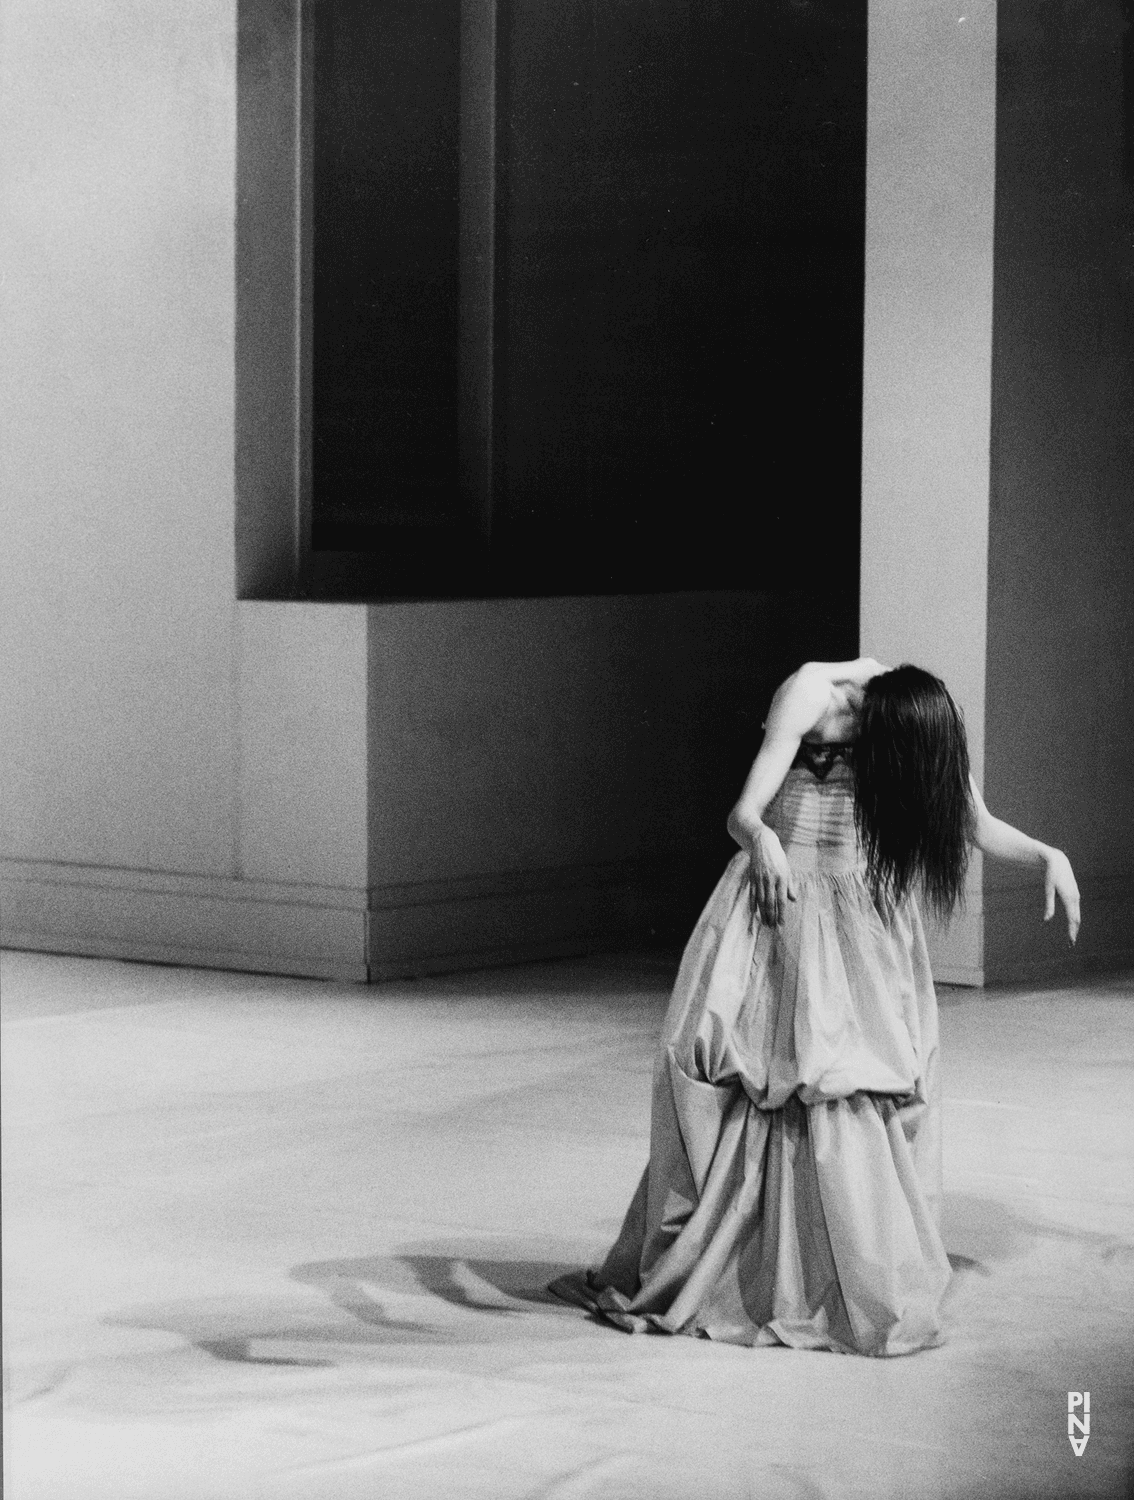 Héléna Pikon in “Two Cigarettes in the Dark” by Pina Bausch